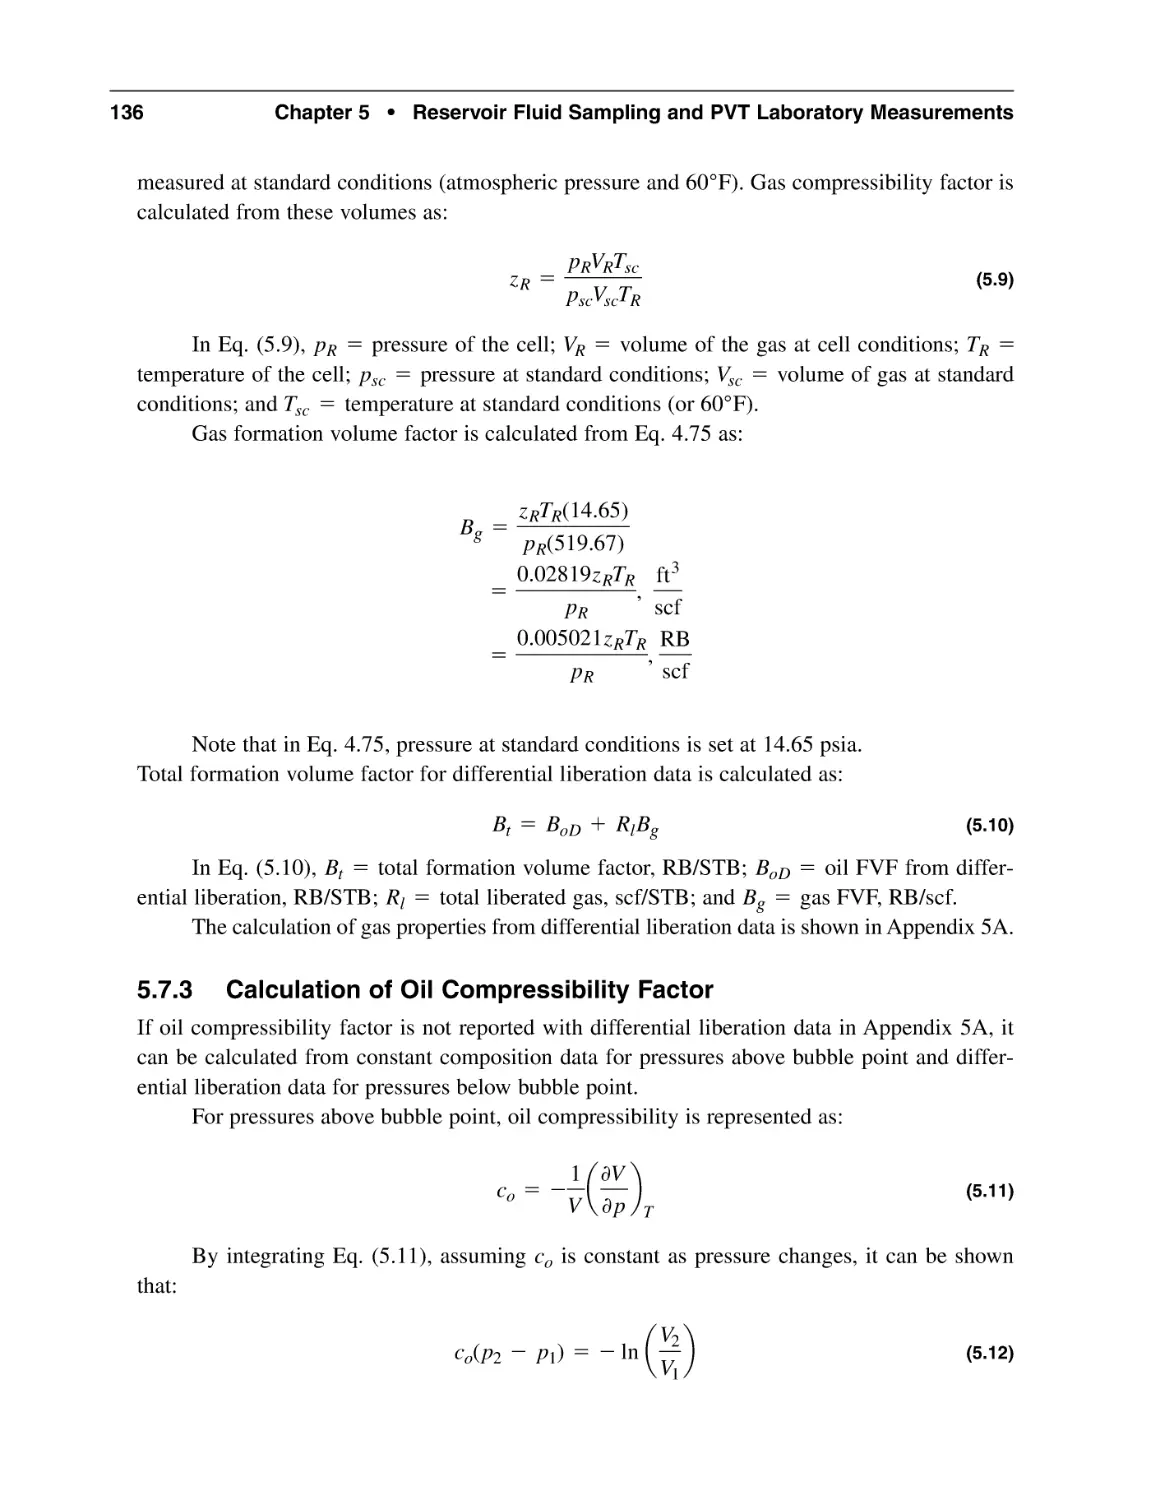 5.7.3 Calculation of Oil Compressibility Factor